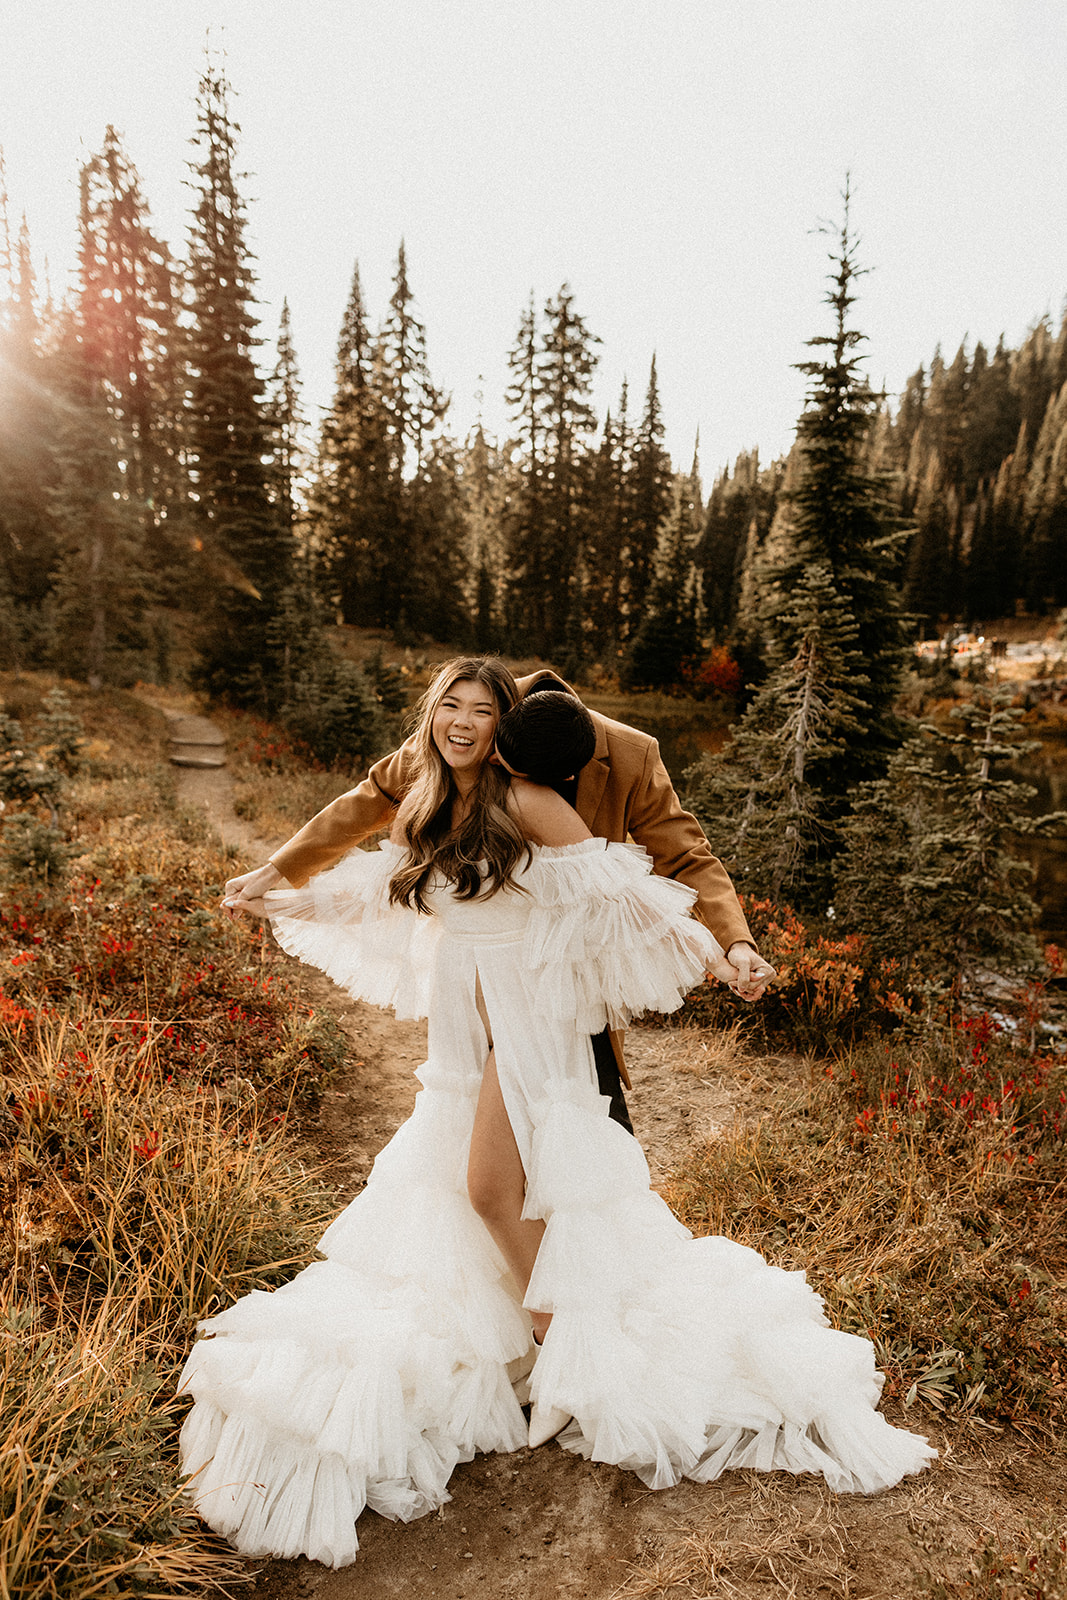 How to Hike with a Wedding Dress for an Elopement — Juliana Renee